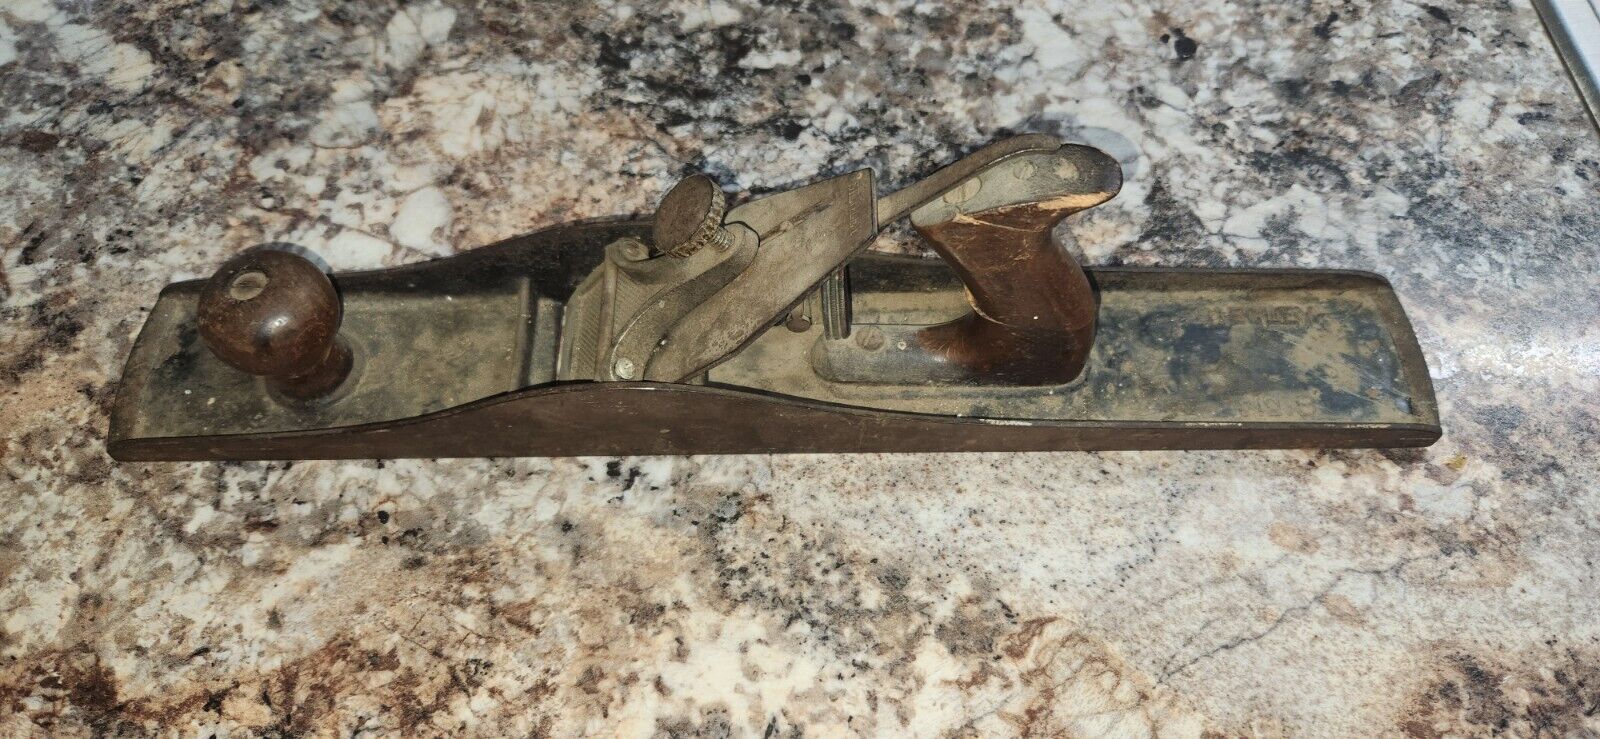 ANTIQUE EARLY SIEGLEY No.6 PRELATERAL? CORRUGATED BOTTOM WOOD PLANE